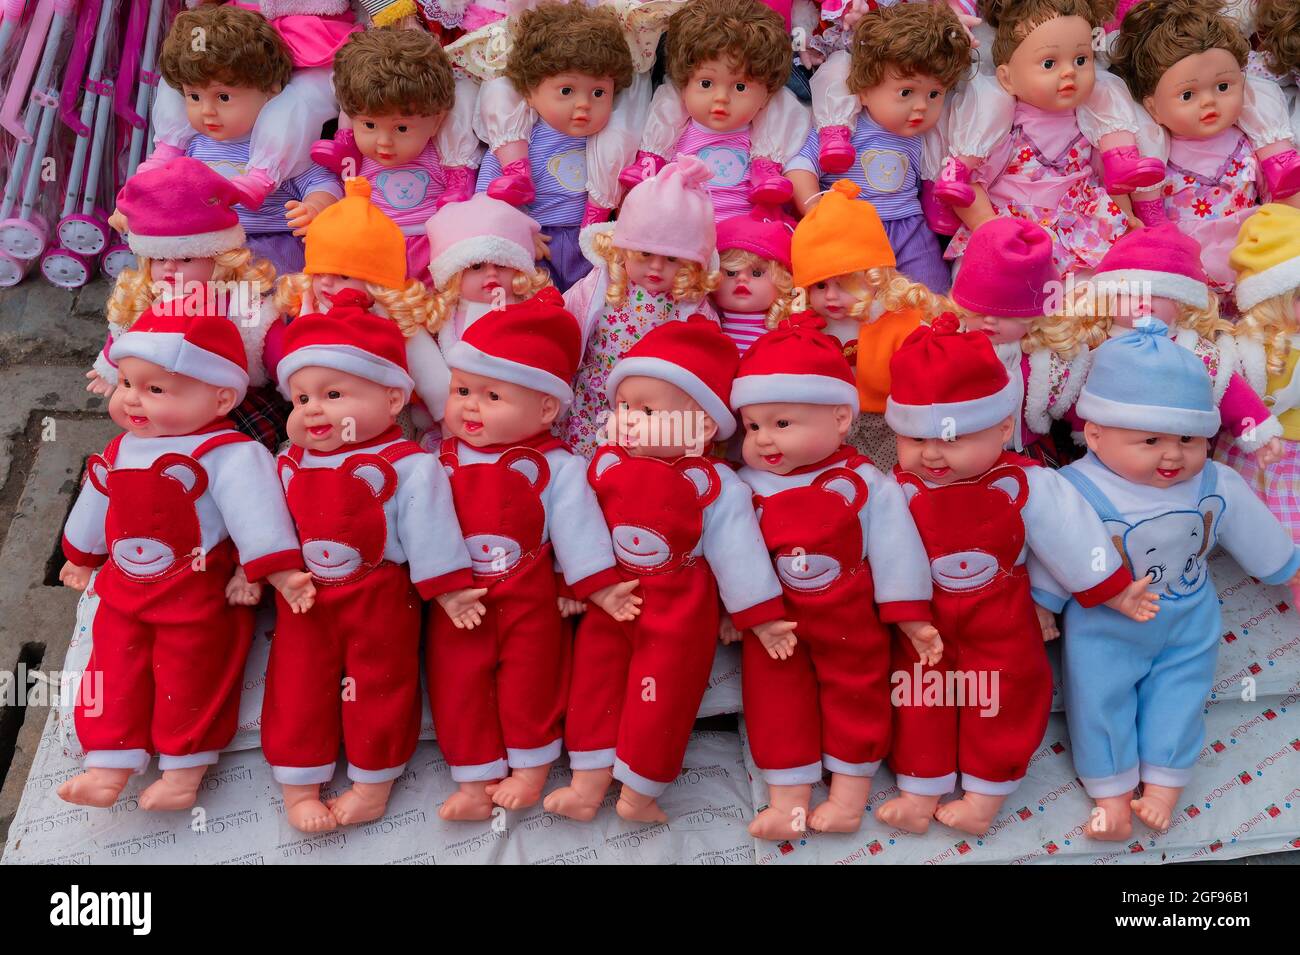 Beautiful cute baby dolls for sale at retail shop at Christmas market, New  Market area, Kolkata, West Bengal, India Stock Photo - Alamy